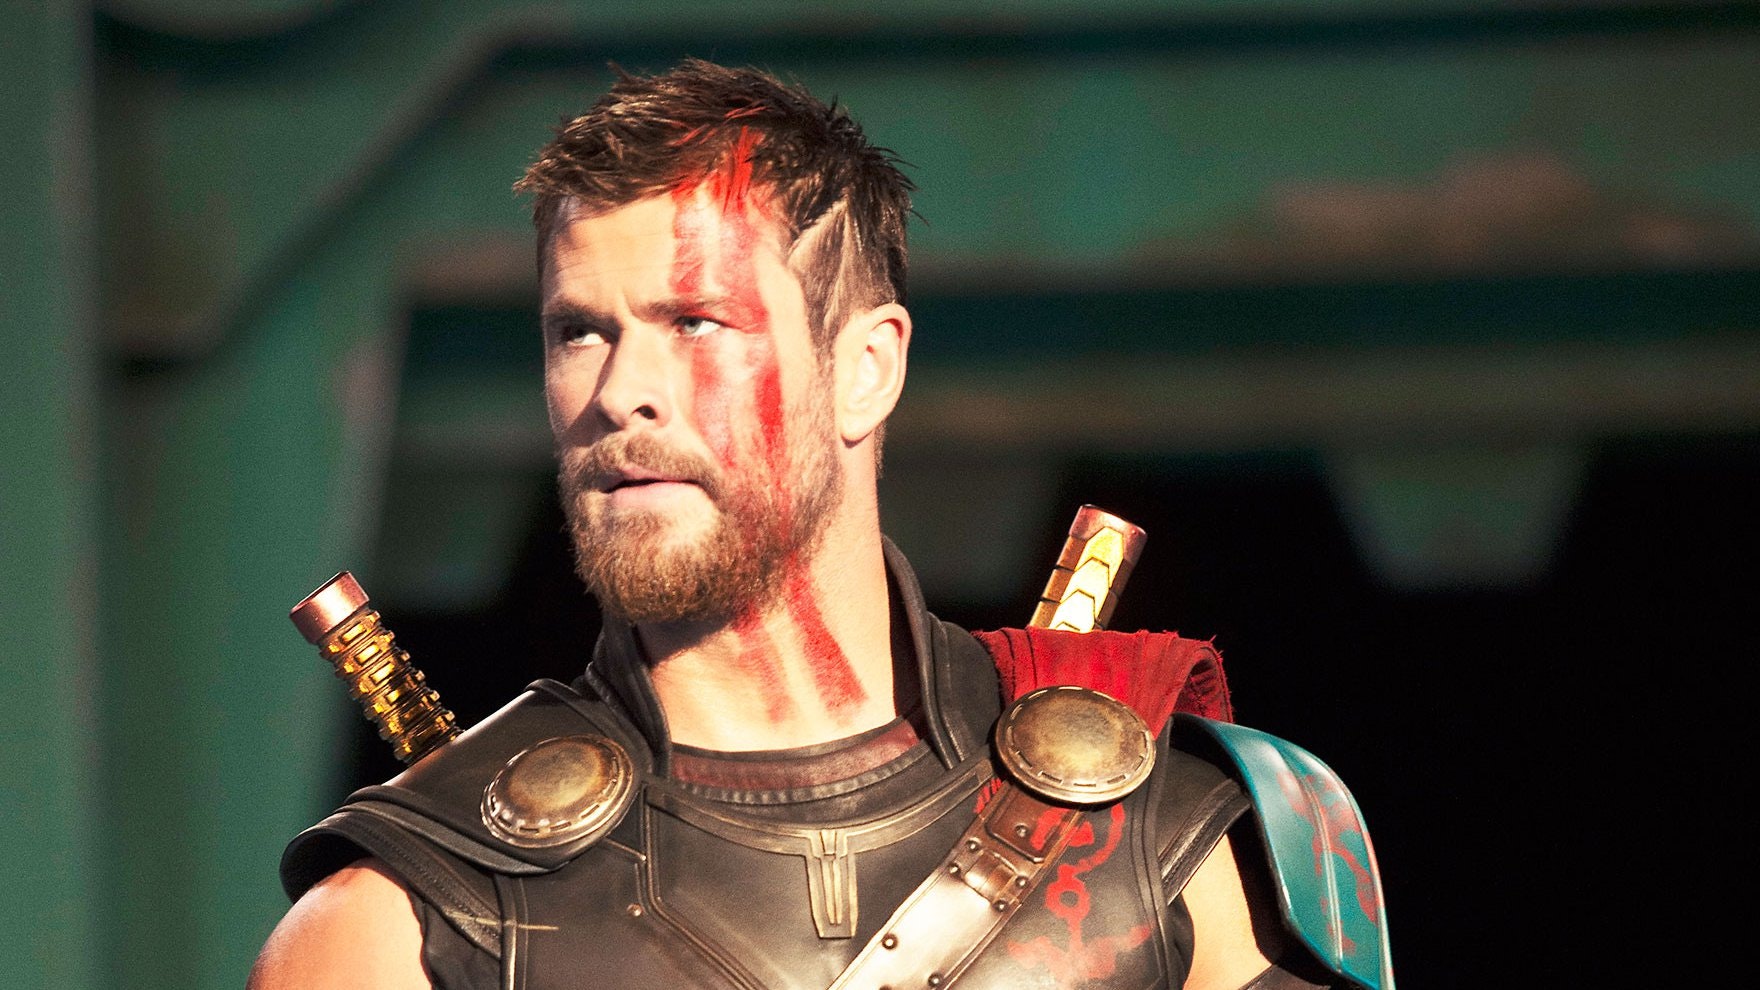 Thor: Ragnarok' Review: Marvel's Hero Fights to Save His Home Planet